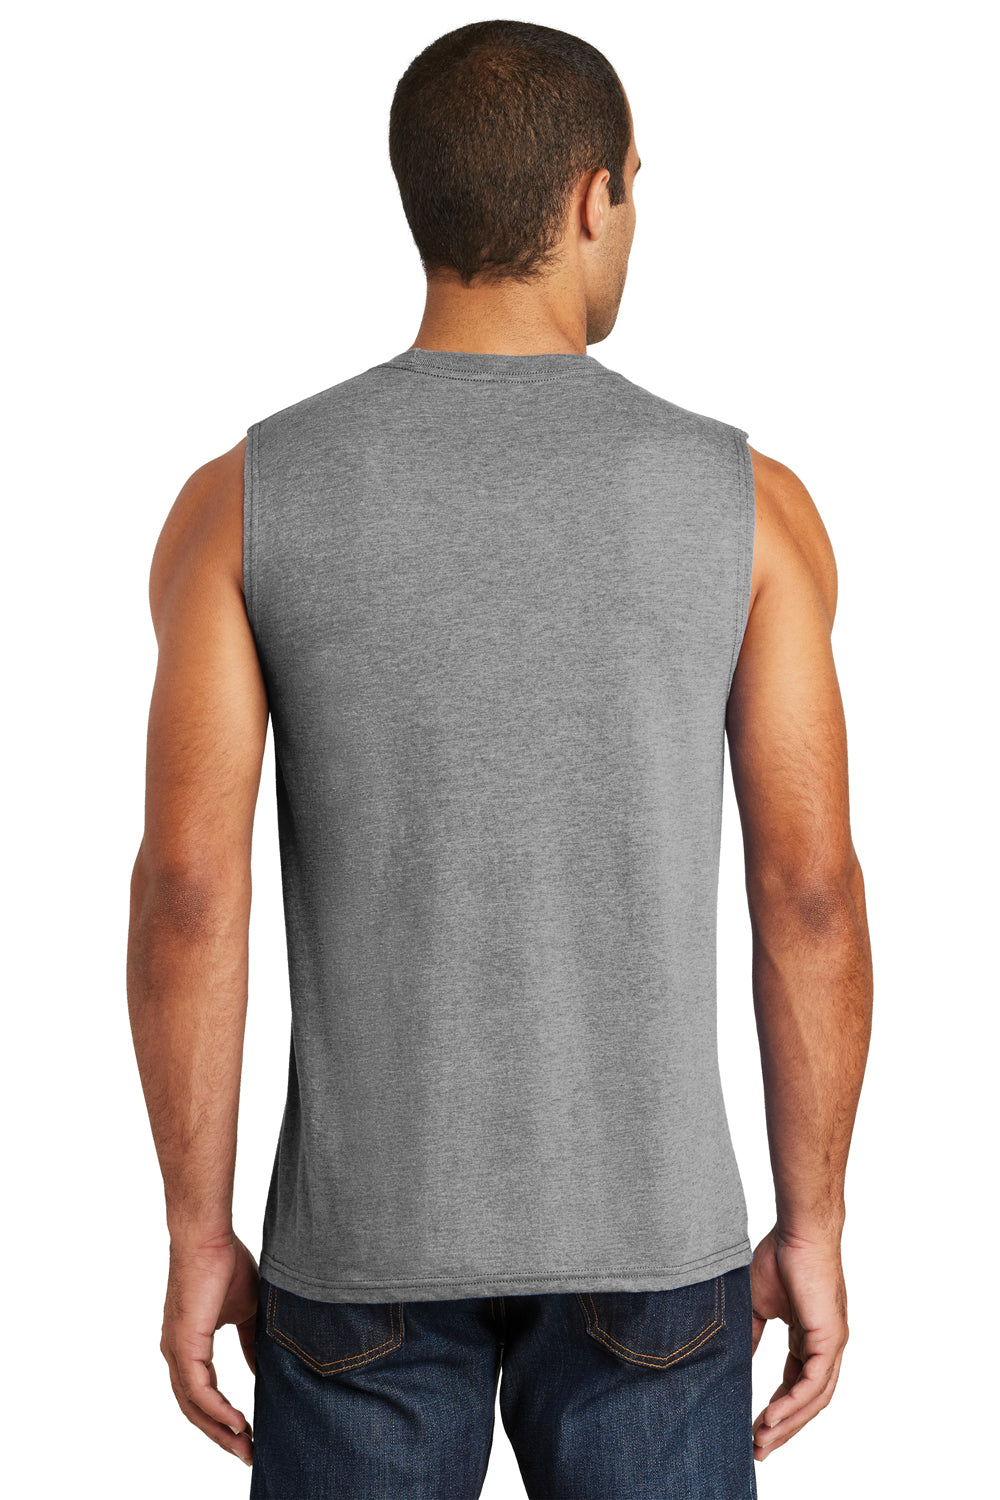 District DT6300 Mens Very Important Muscle Tank Top Grey Frost Back